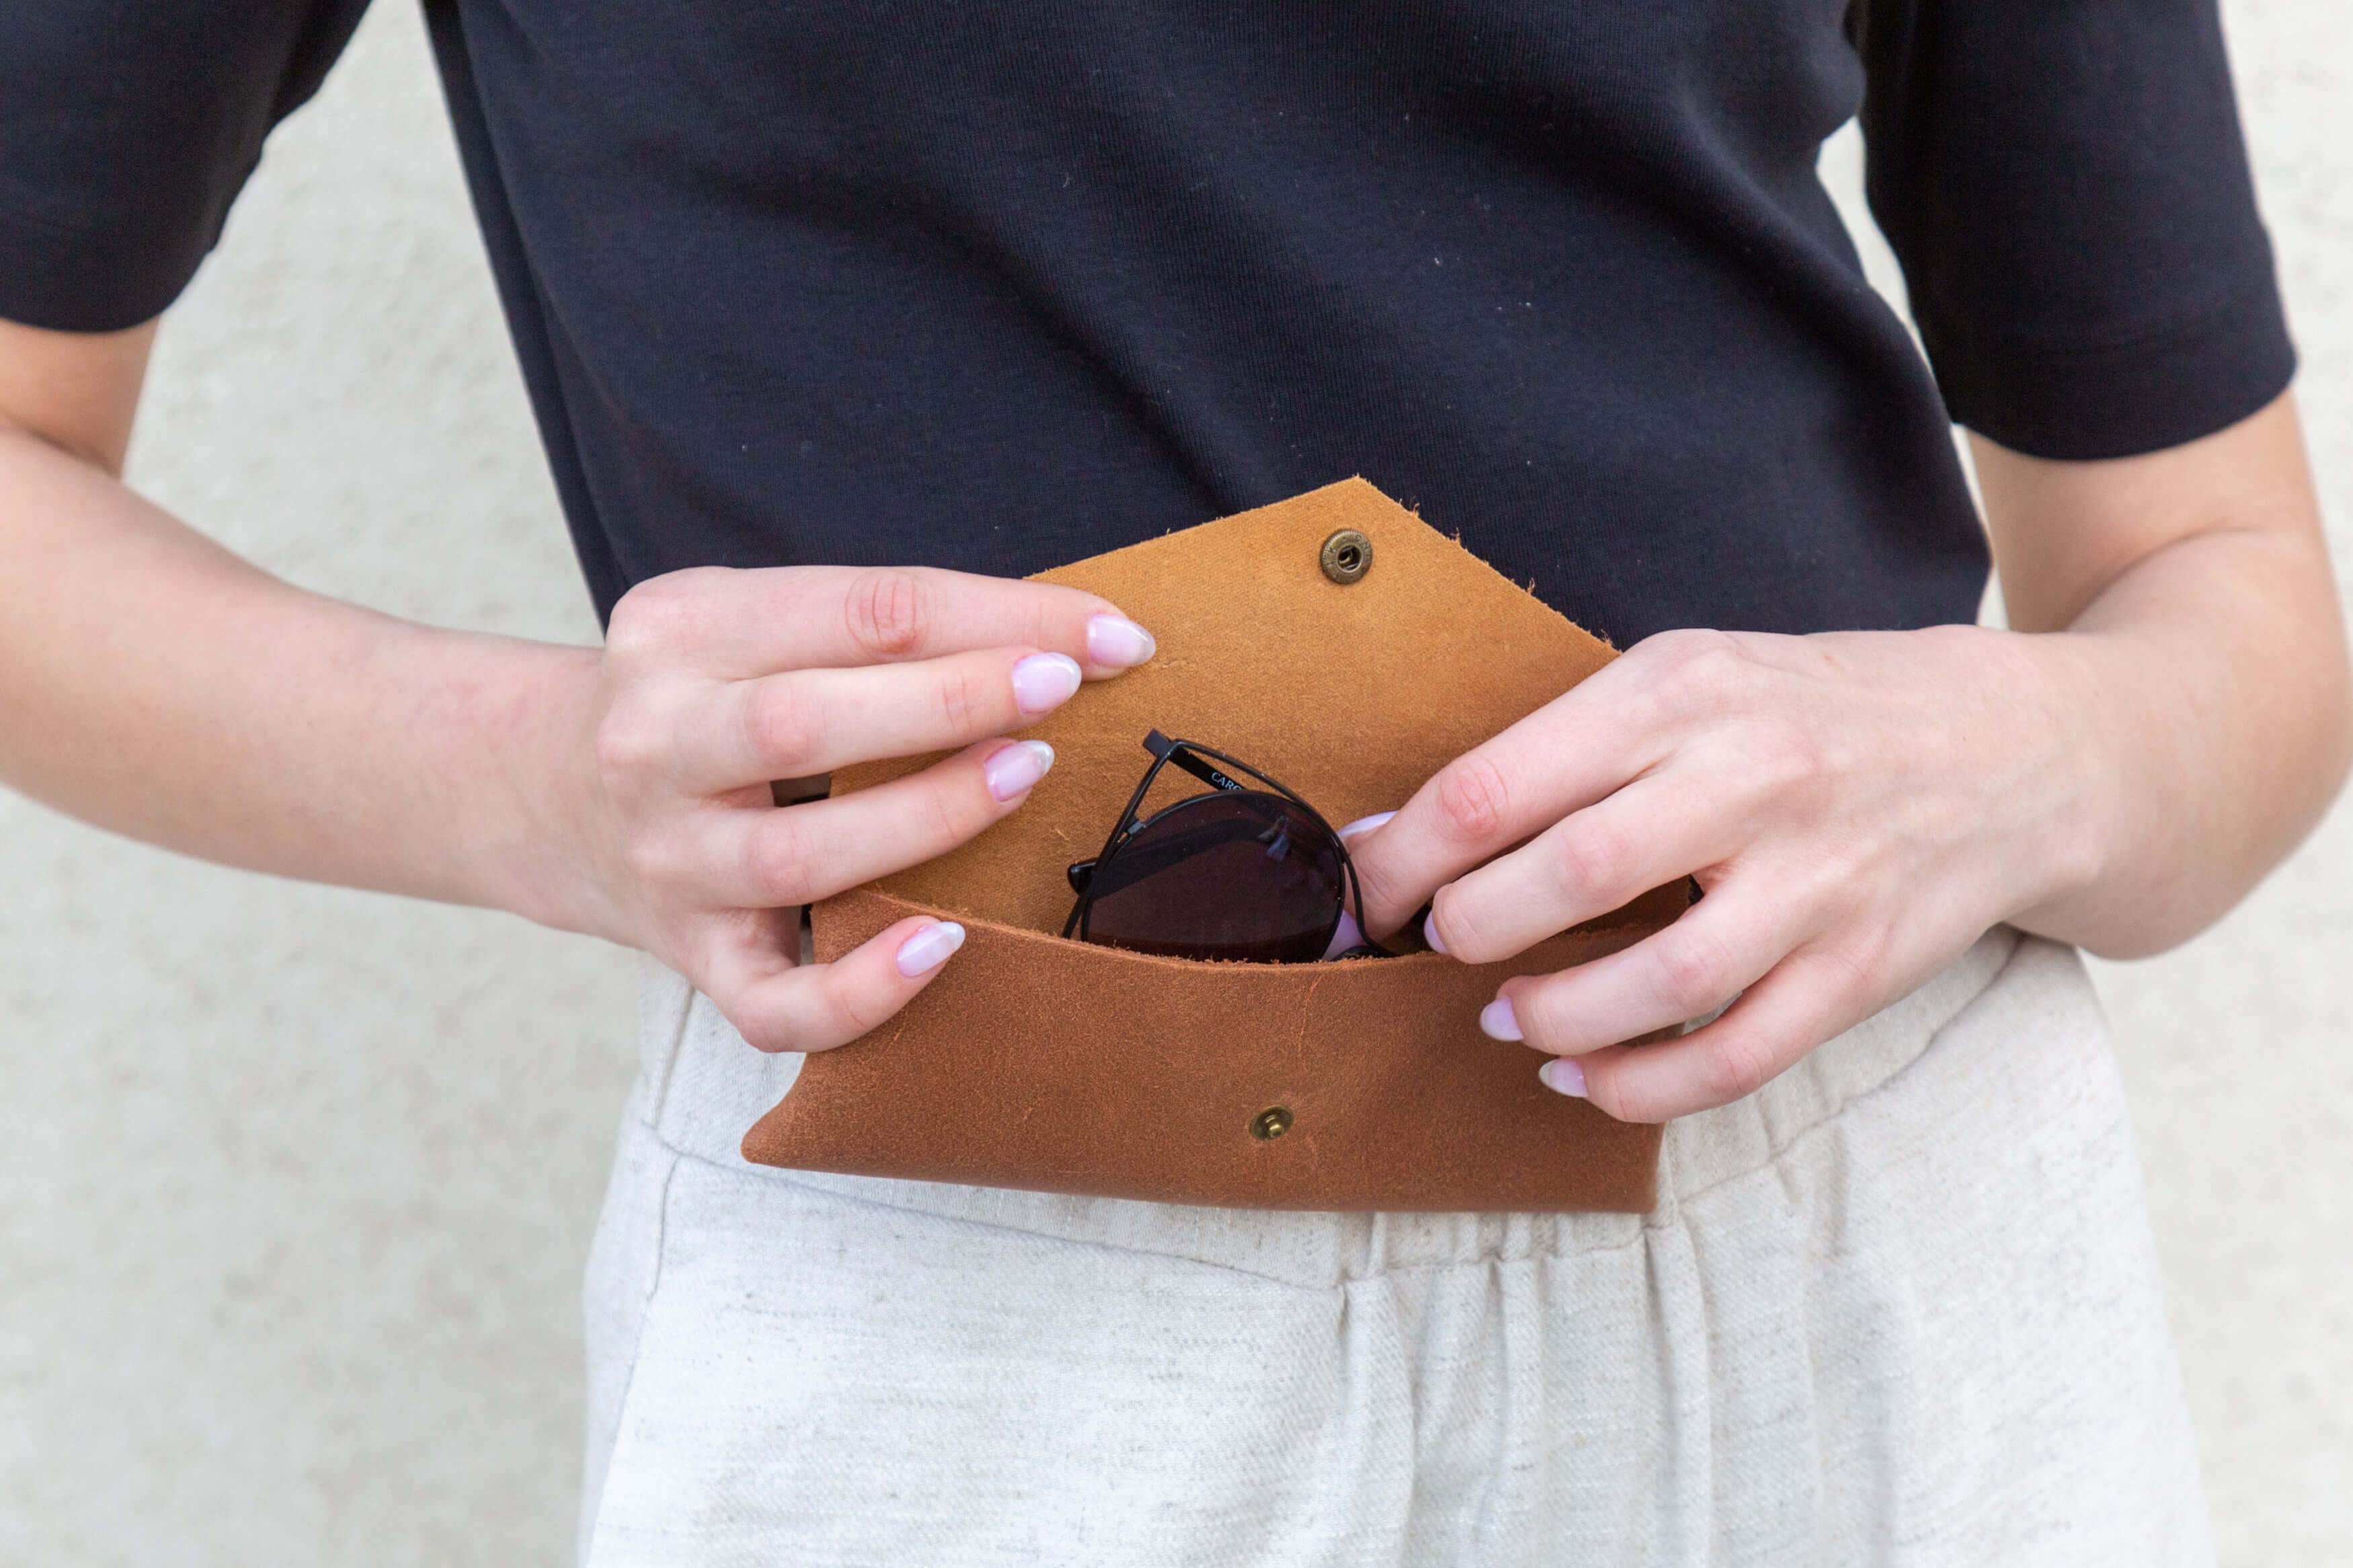 Personalized Leather Sunglasses Case